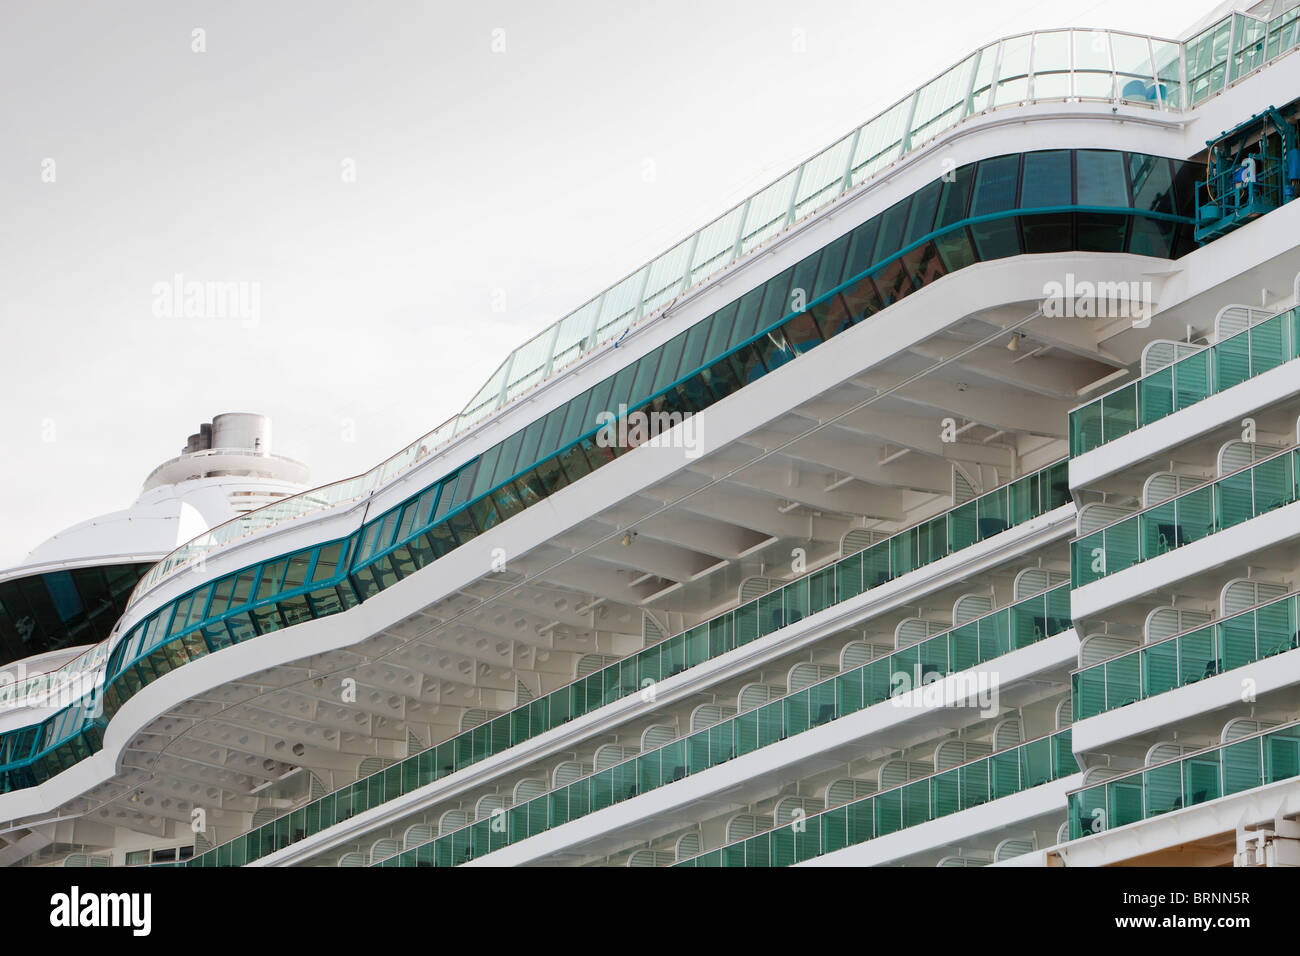 A massive cruise liner, The Jewel of the Seas, docked in Akureyri Stock Photo